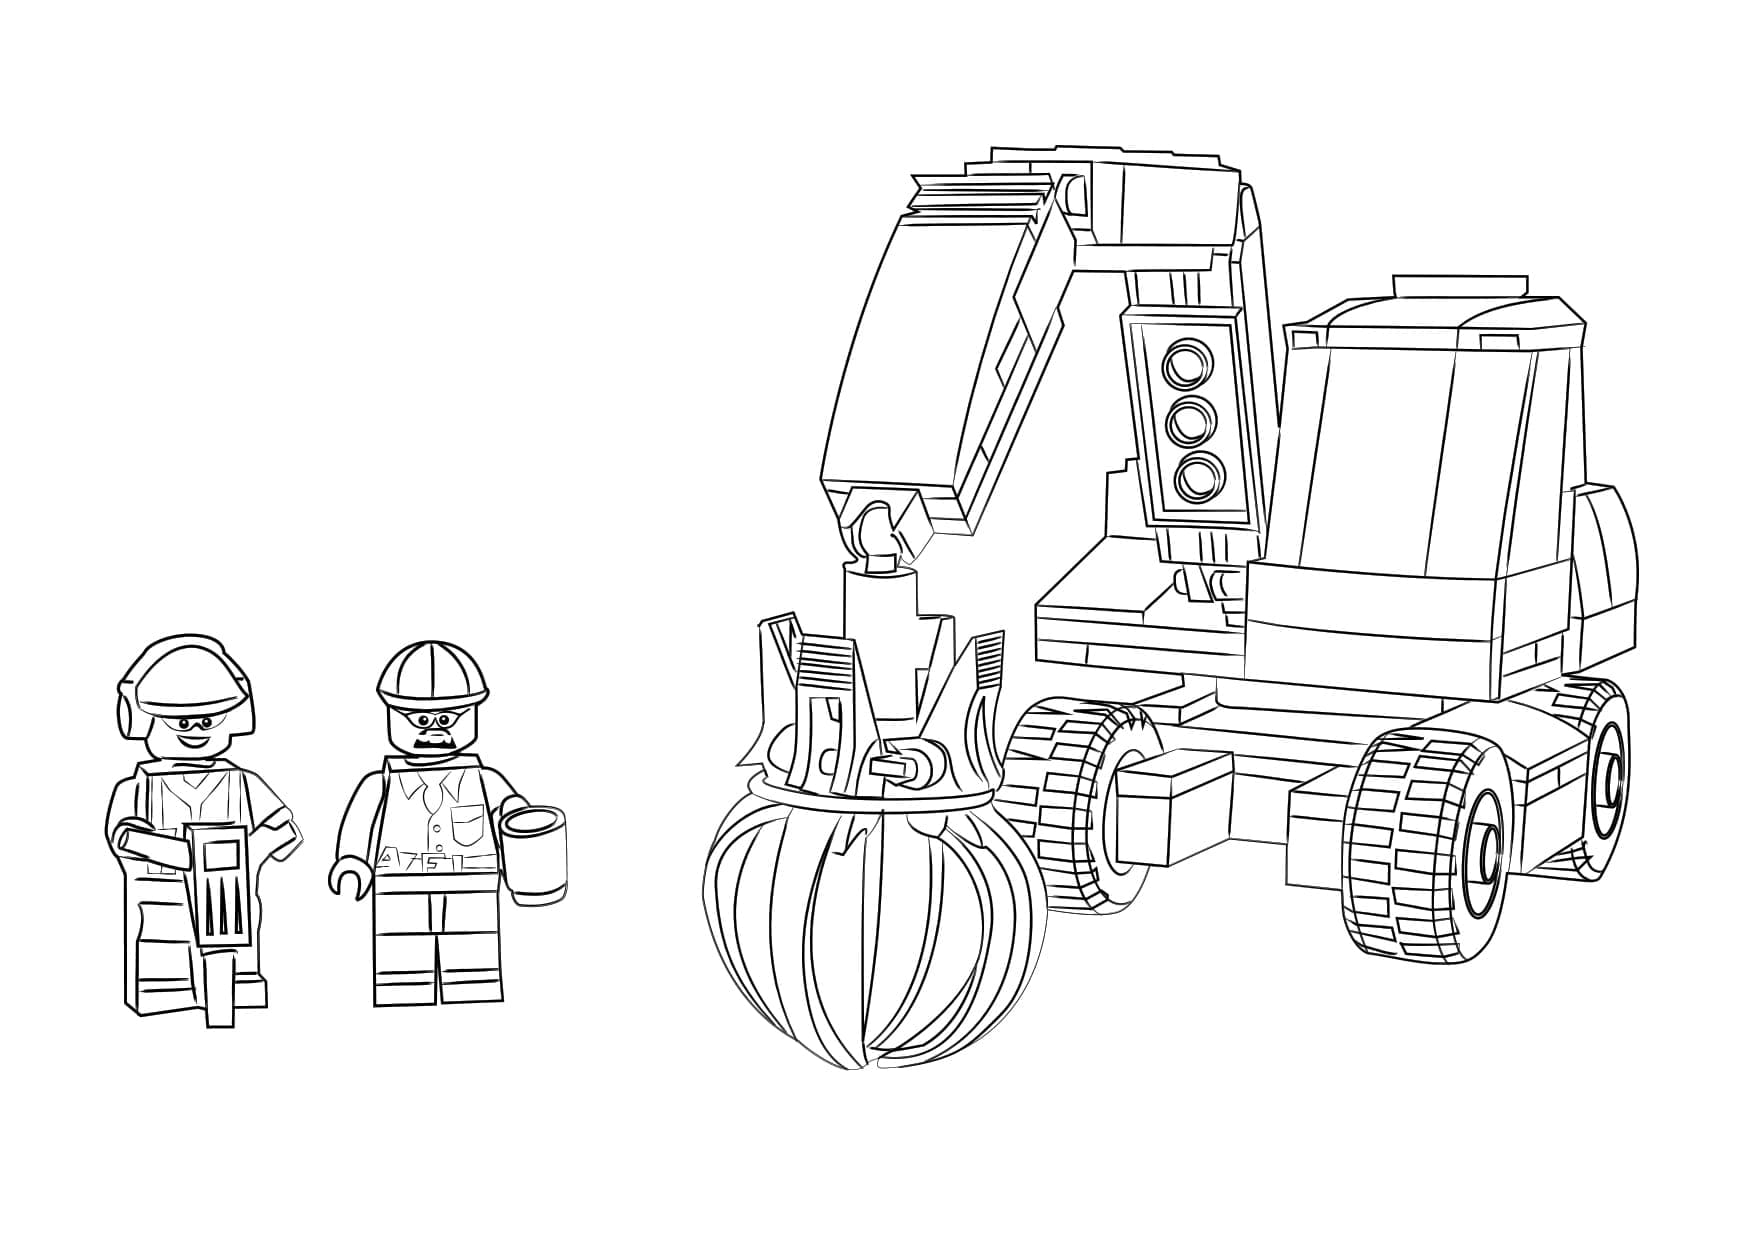 lego ambulance coloring pages